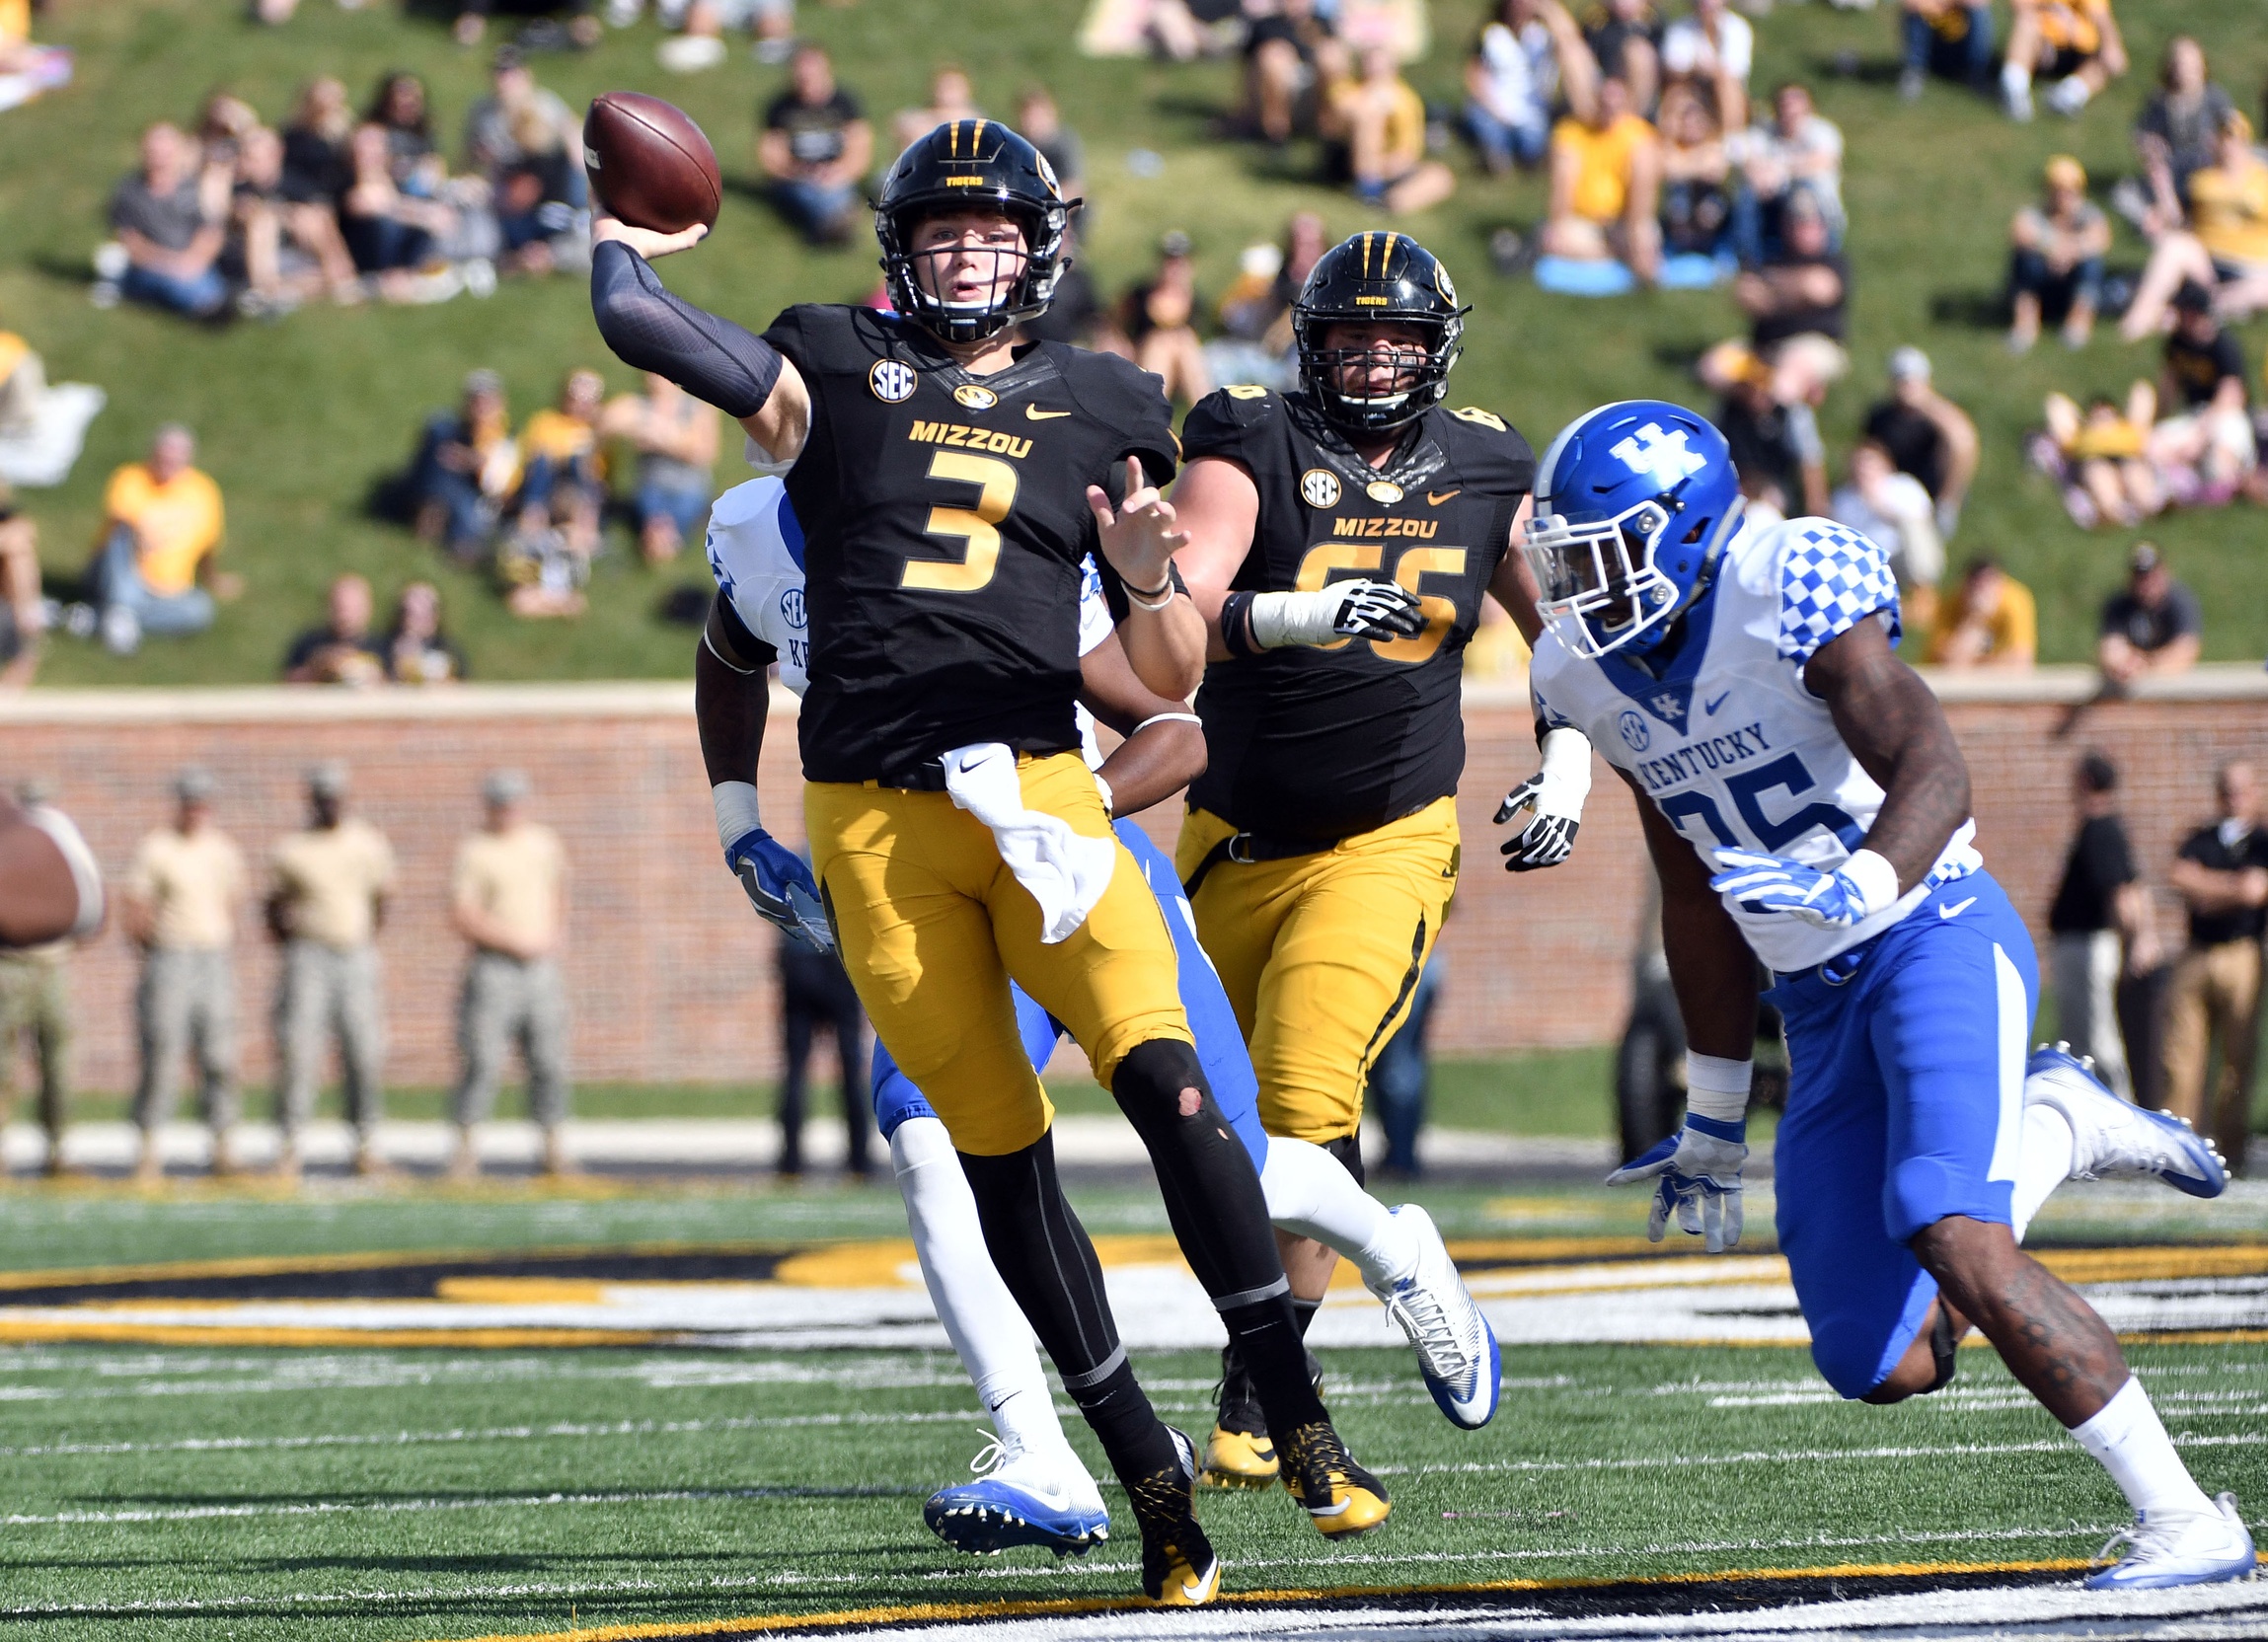 Oct 29, 2016; Columbia, MO, USA; Missouri Tigers quarterback Drew Lock (3) throws a pass during the first half against the Kentucky Wildcats at Faurot Field. Mandatory Credit: Denny Medley-USA TODAY Sports